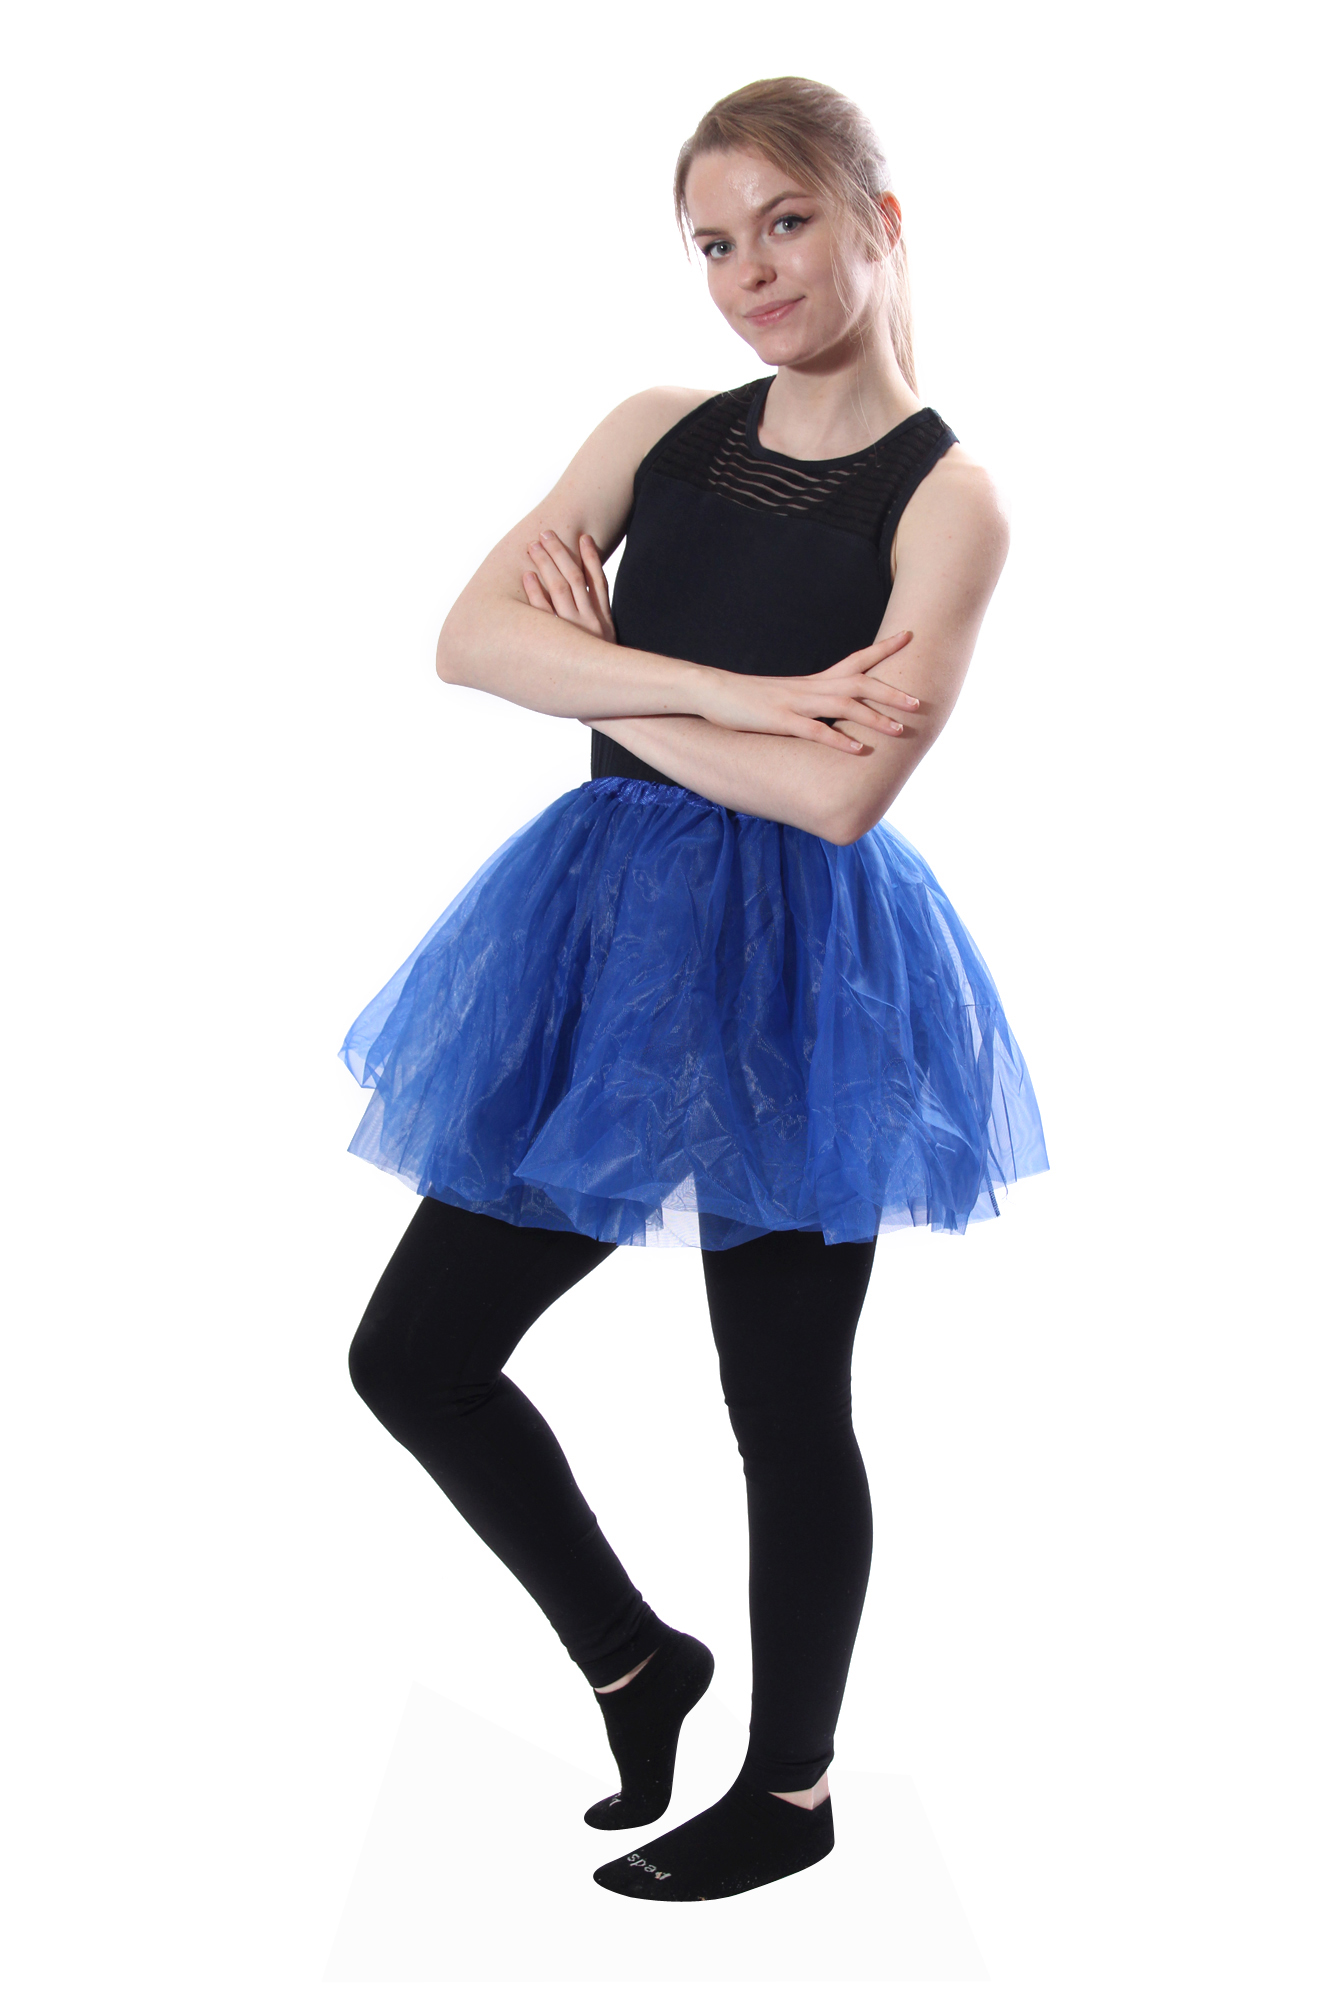 RELBCY Layered Tulle Tutu Ballet Tutu Skirt Princess Party Dance Skirt Classic 3 Layers for Women and Girls 